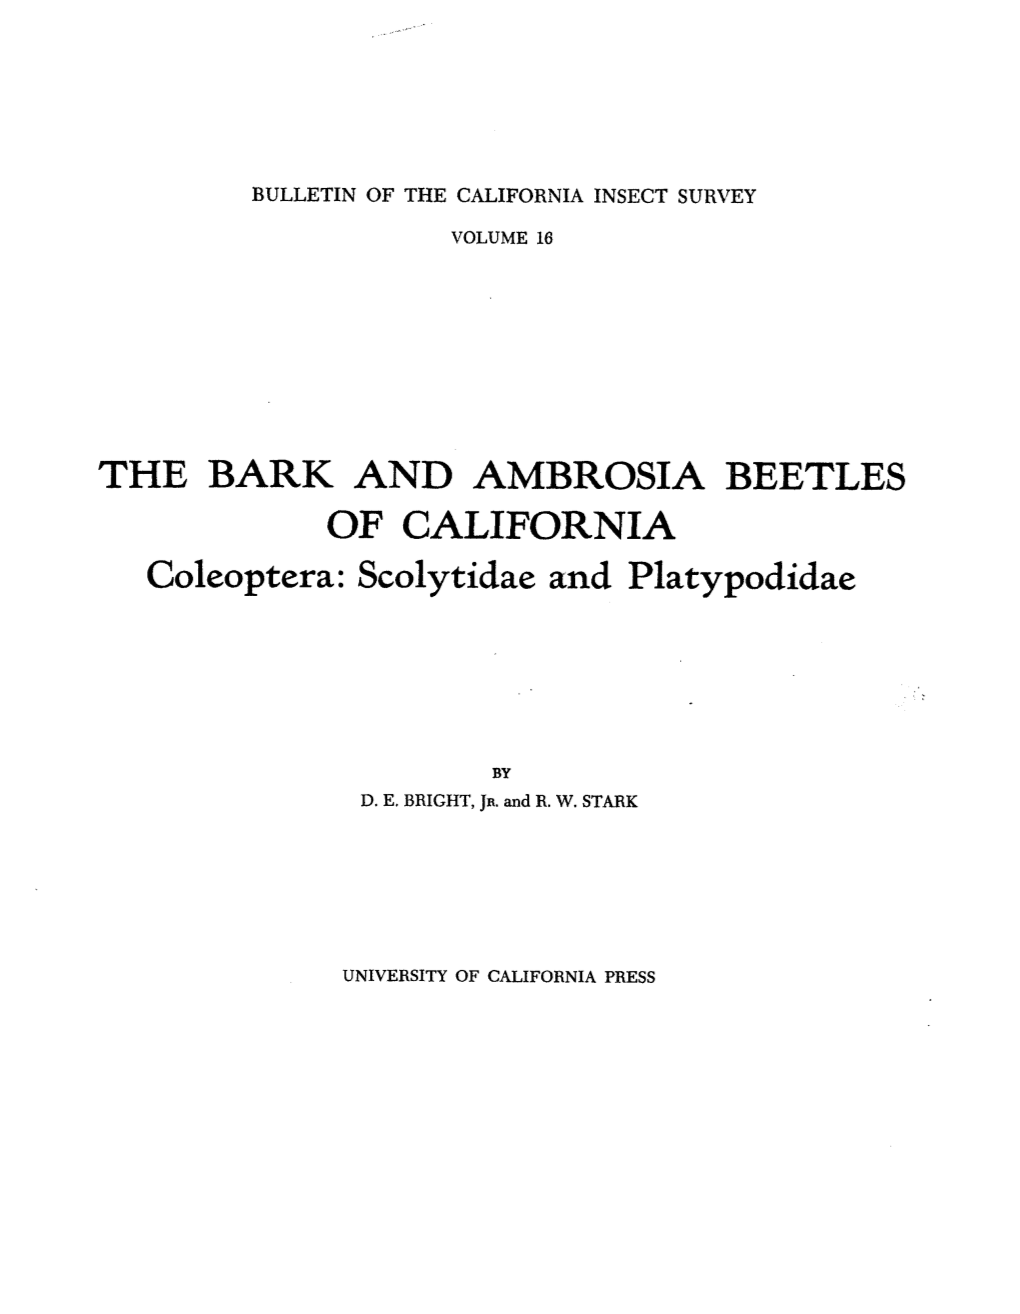 THE BARK and AMBROSIA BEETLES of CALIFORNIA (Coleoptera: Scolytidae and Platypodidae) BULLETIN of the CALIFORNIA INSECT SURVEY